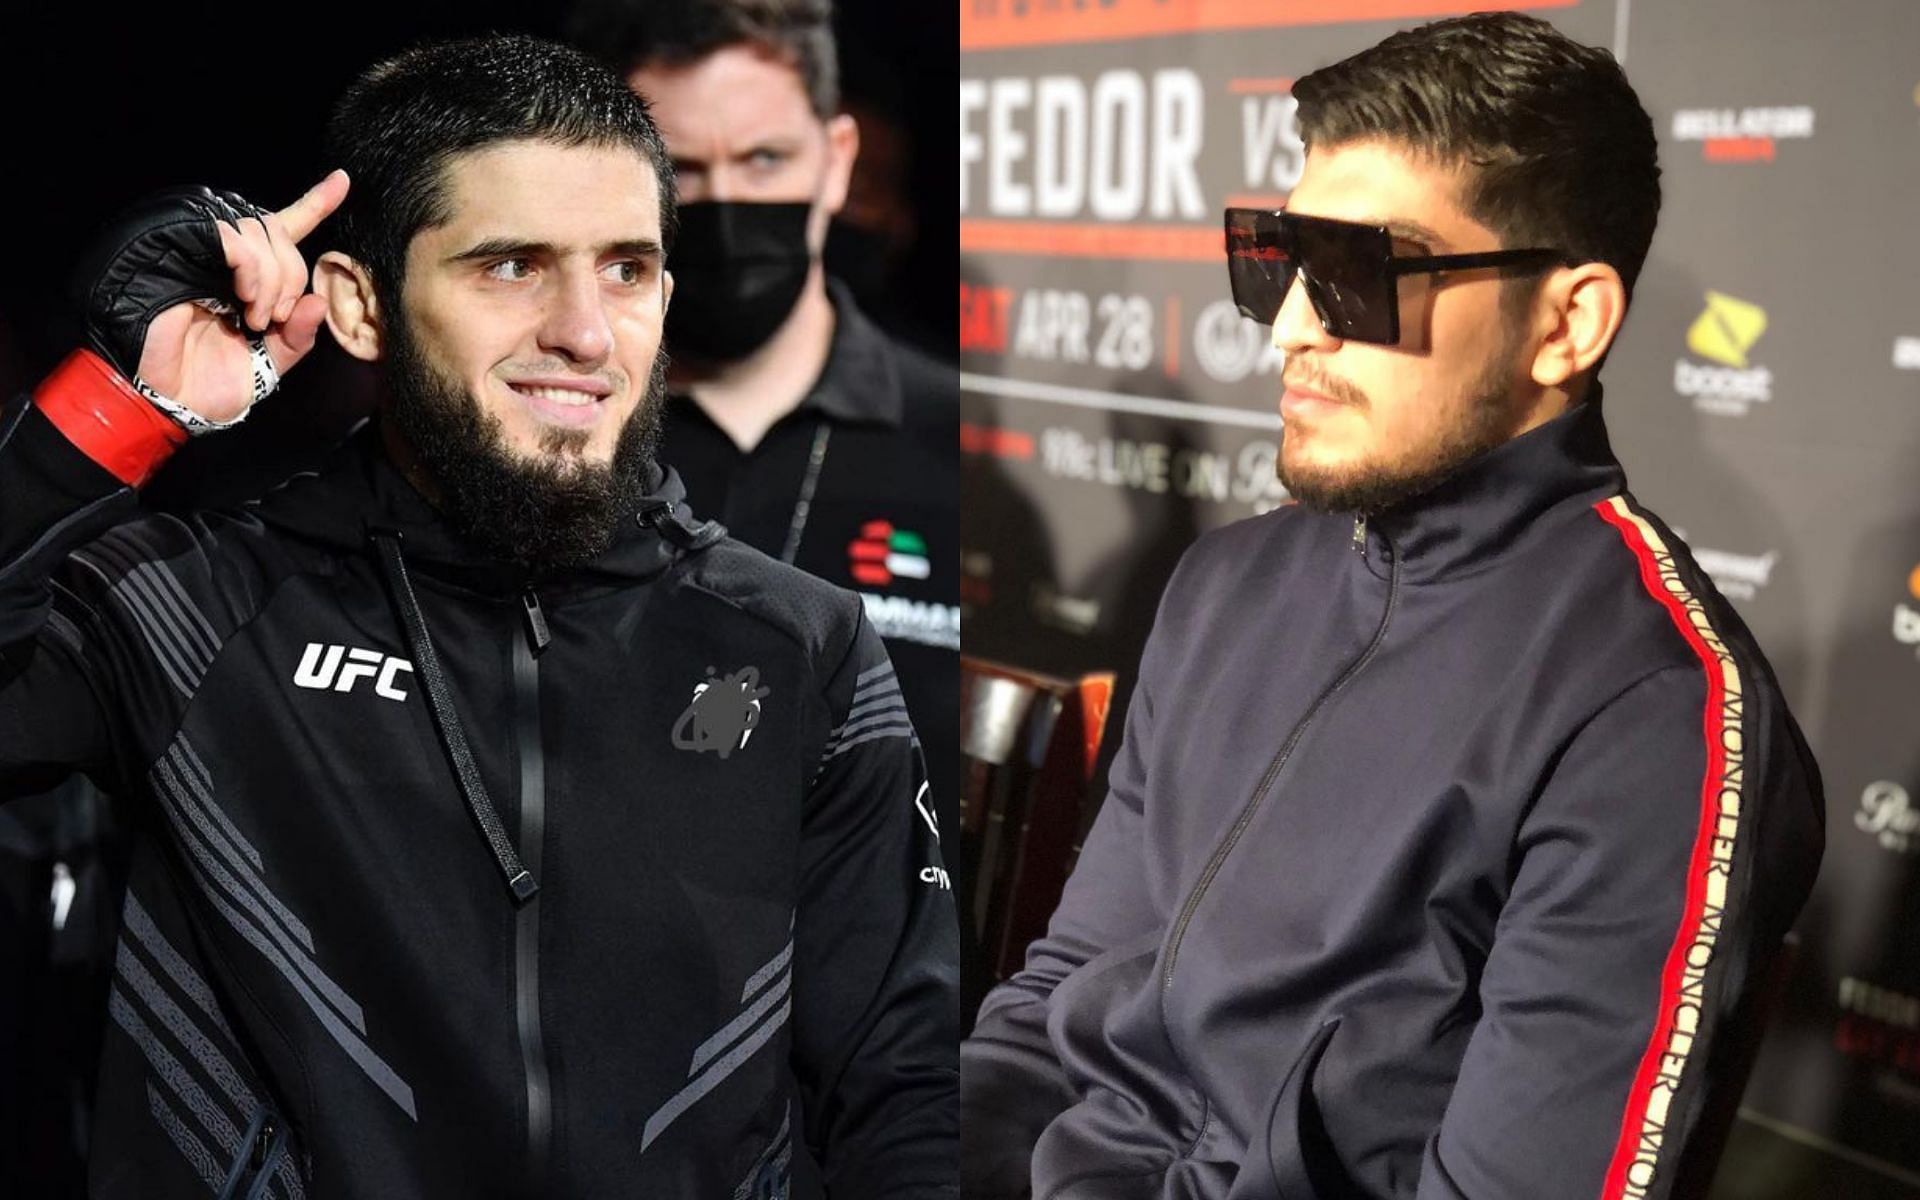 Islam Makhachev (left) and Dillon Danis (right) [Photo credits: @islam_makhachev &amp; @dillondanis on Instagram]